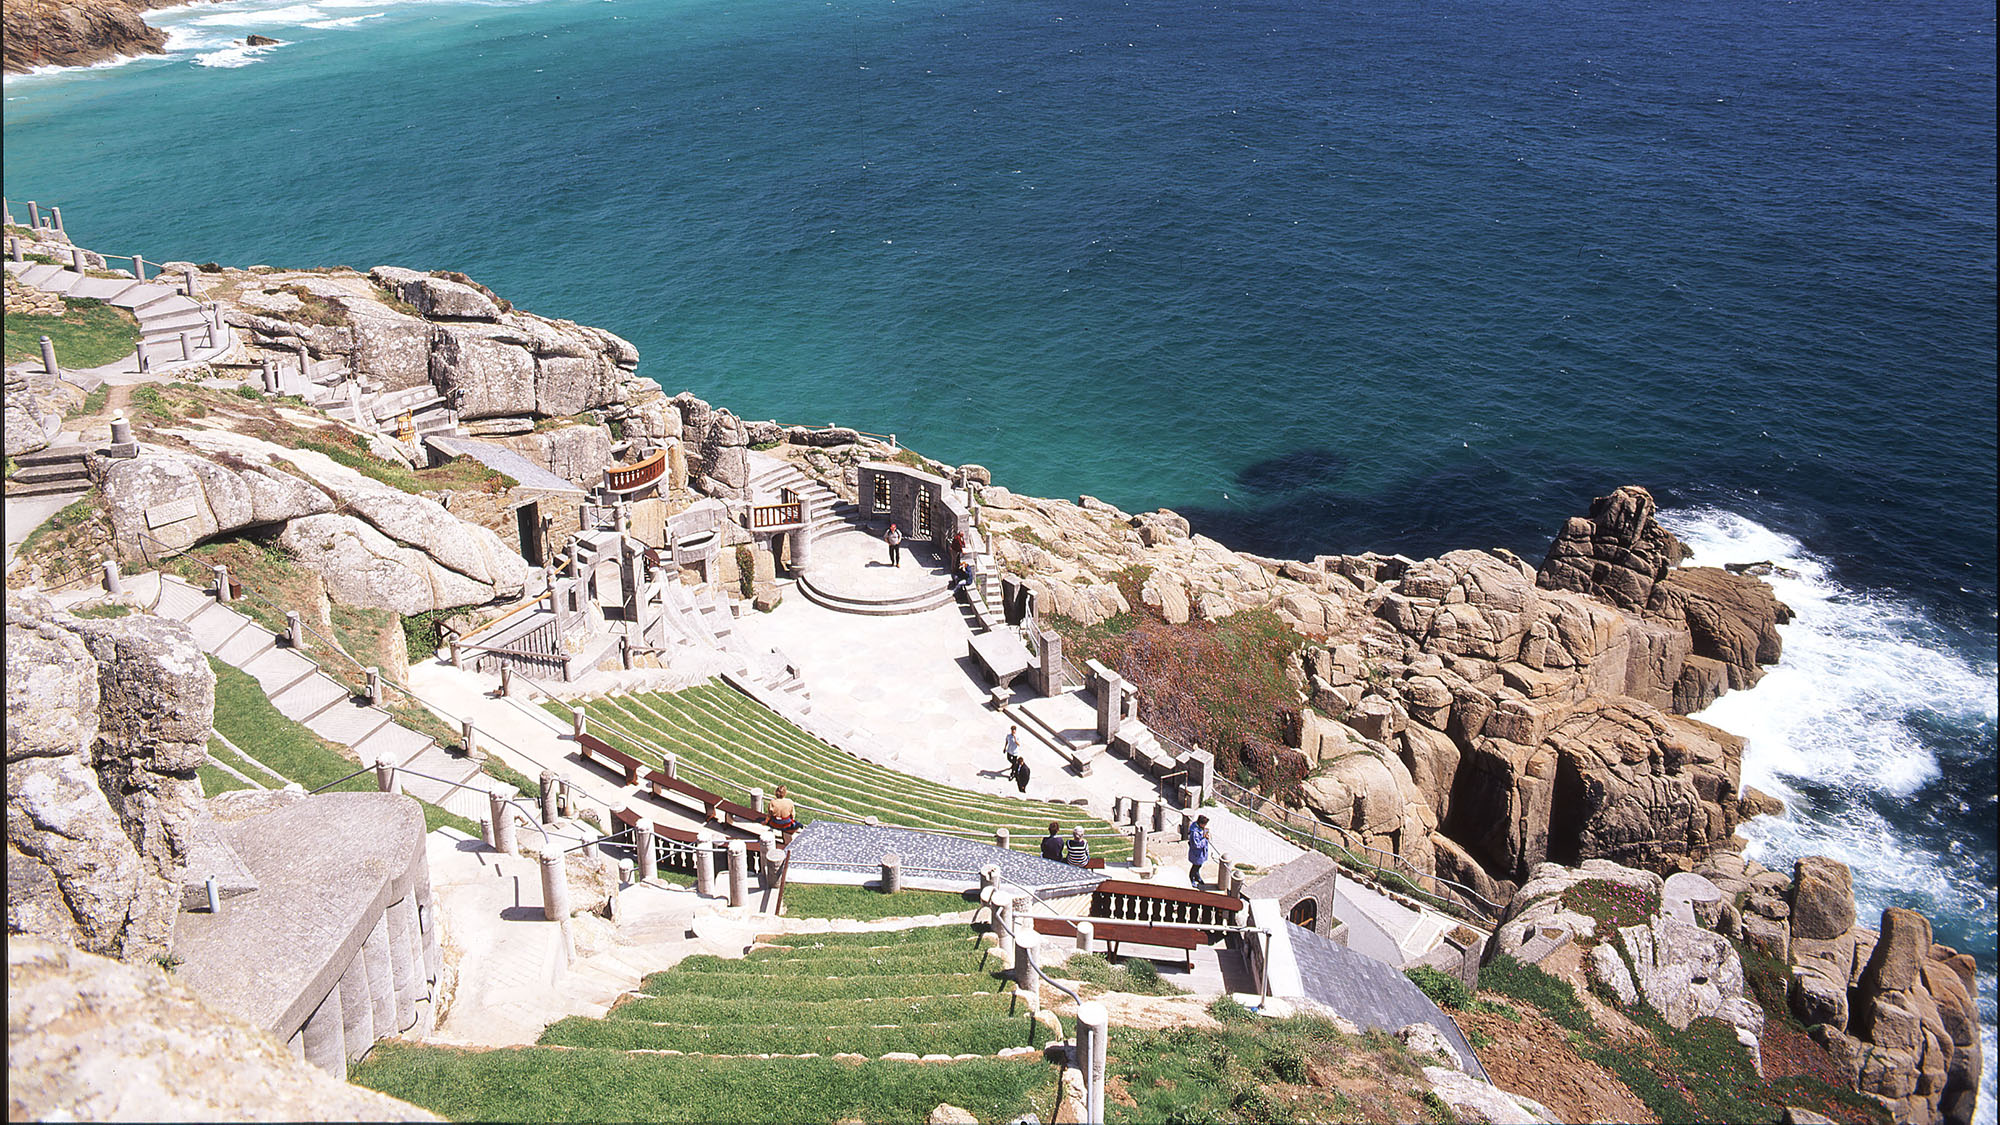 High view of Minack Theatre carved into cliff face with the sea in the background